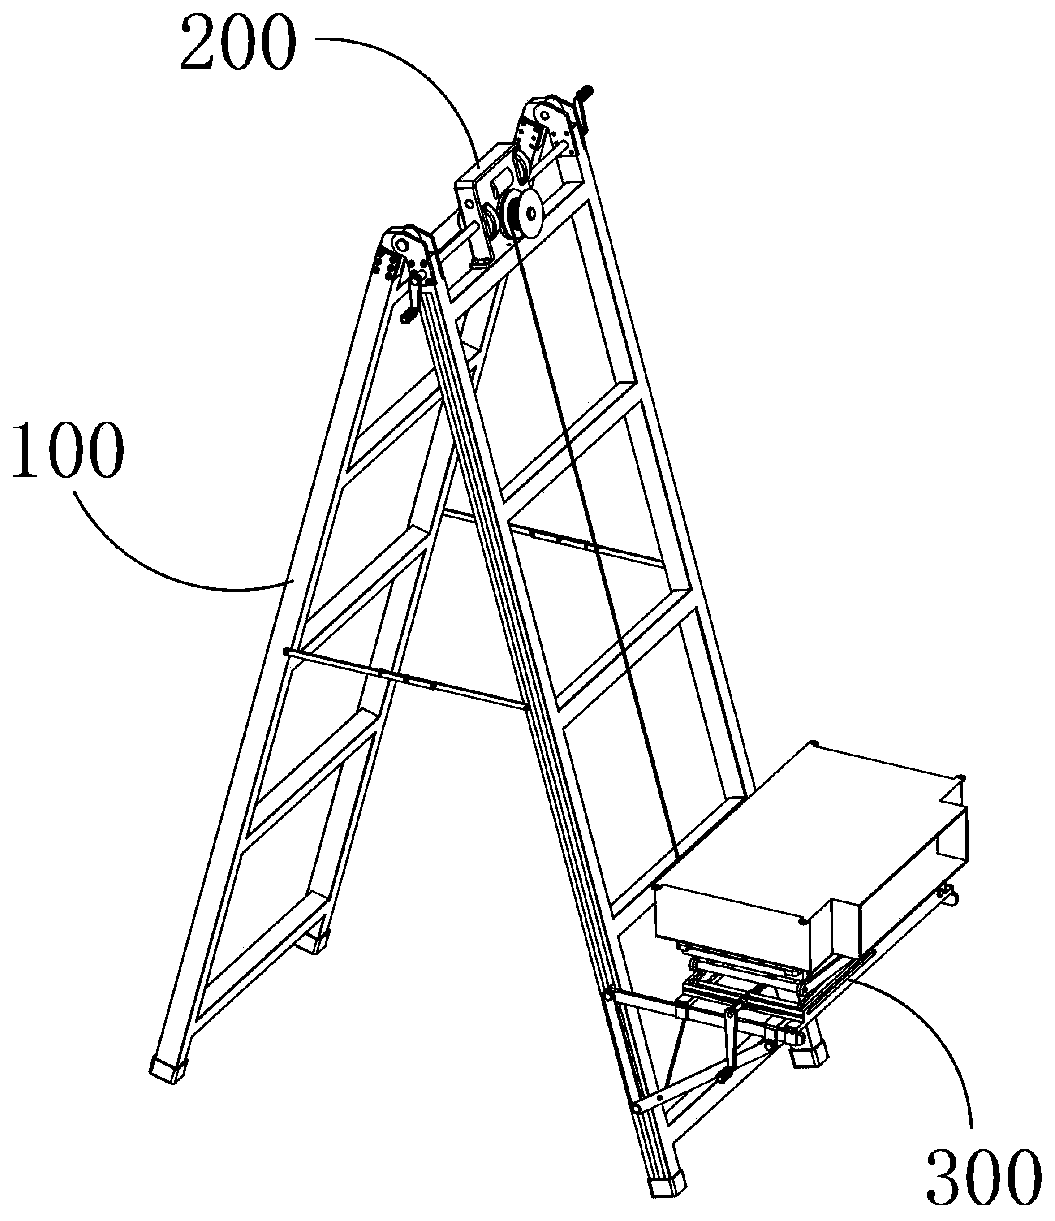 Manual lift type ladder for installation of air conditioners, chandeliers and other electrical appliances